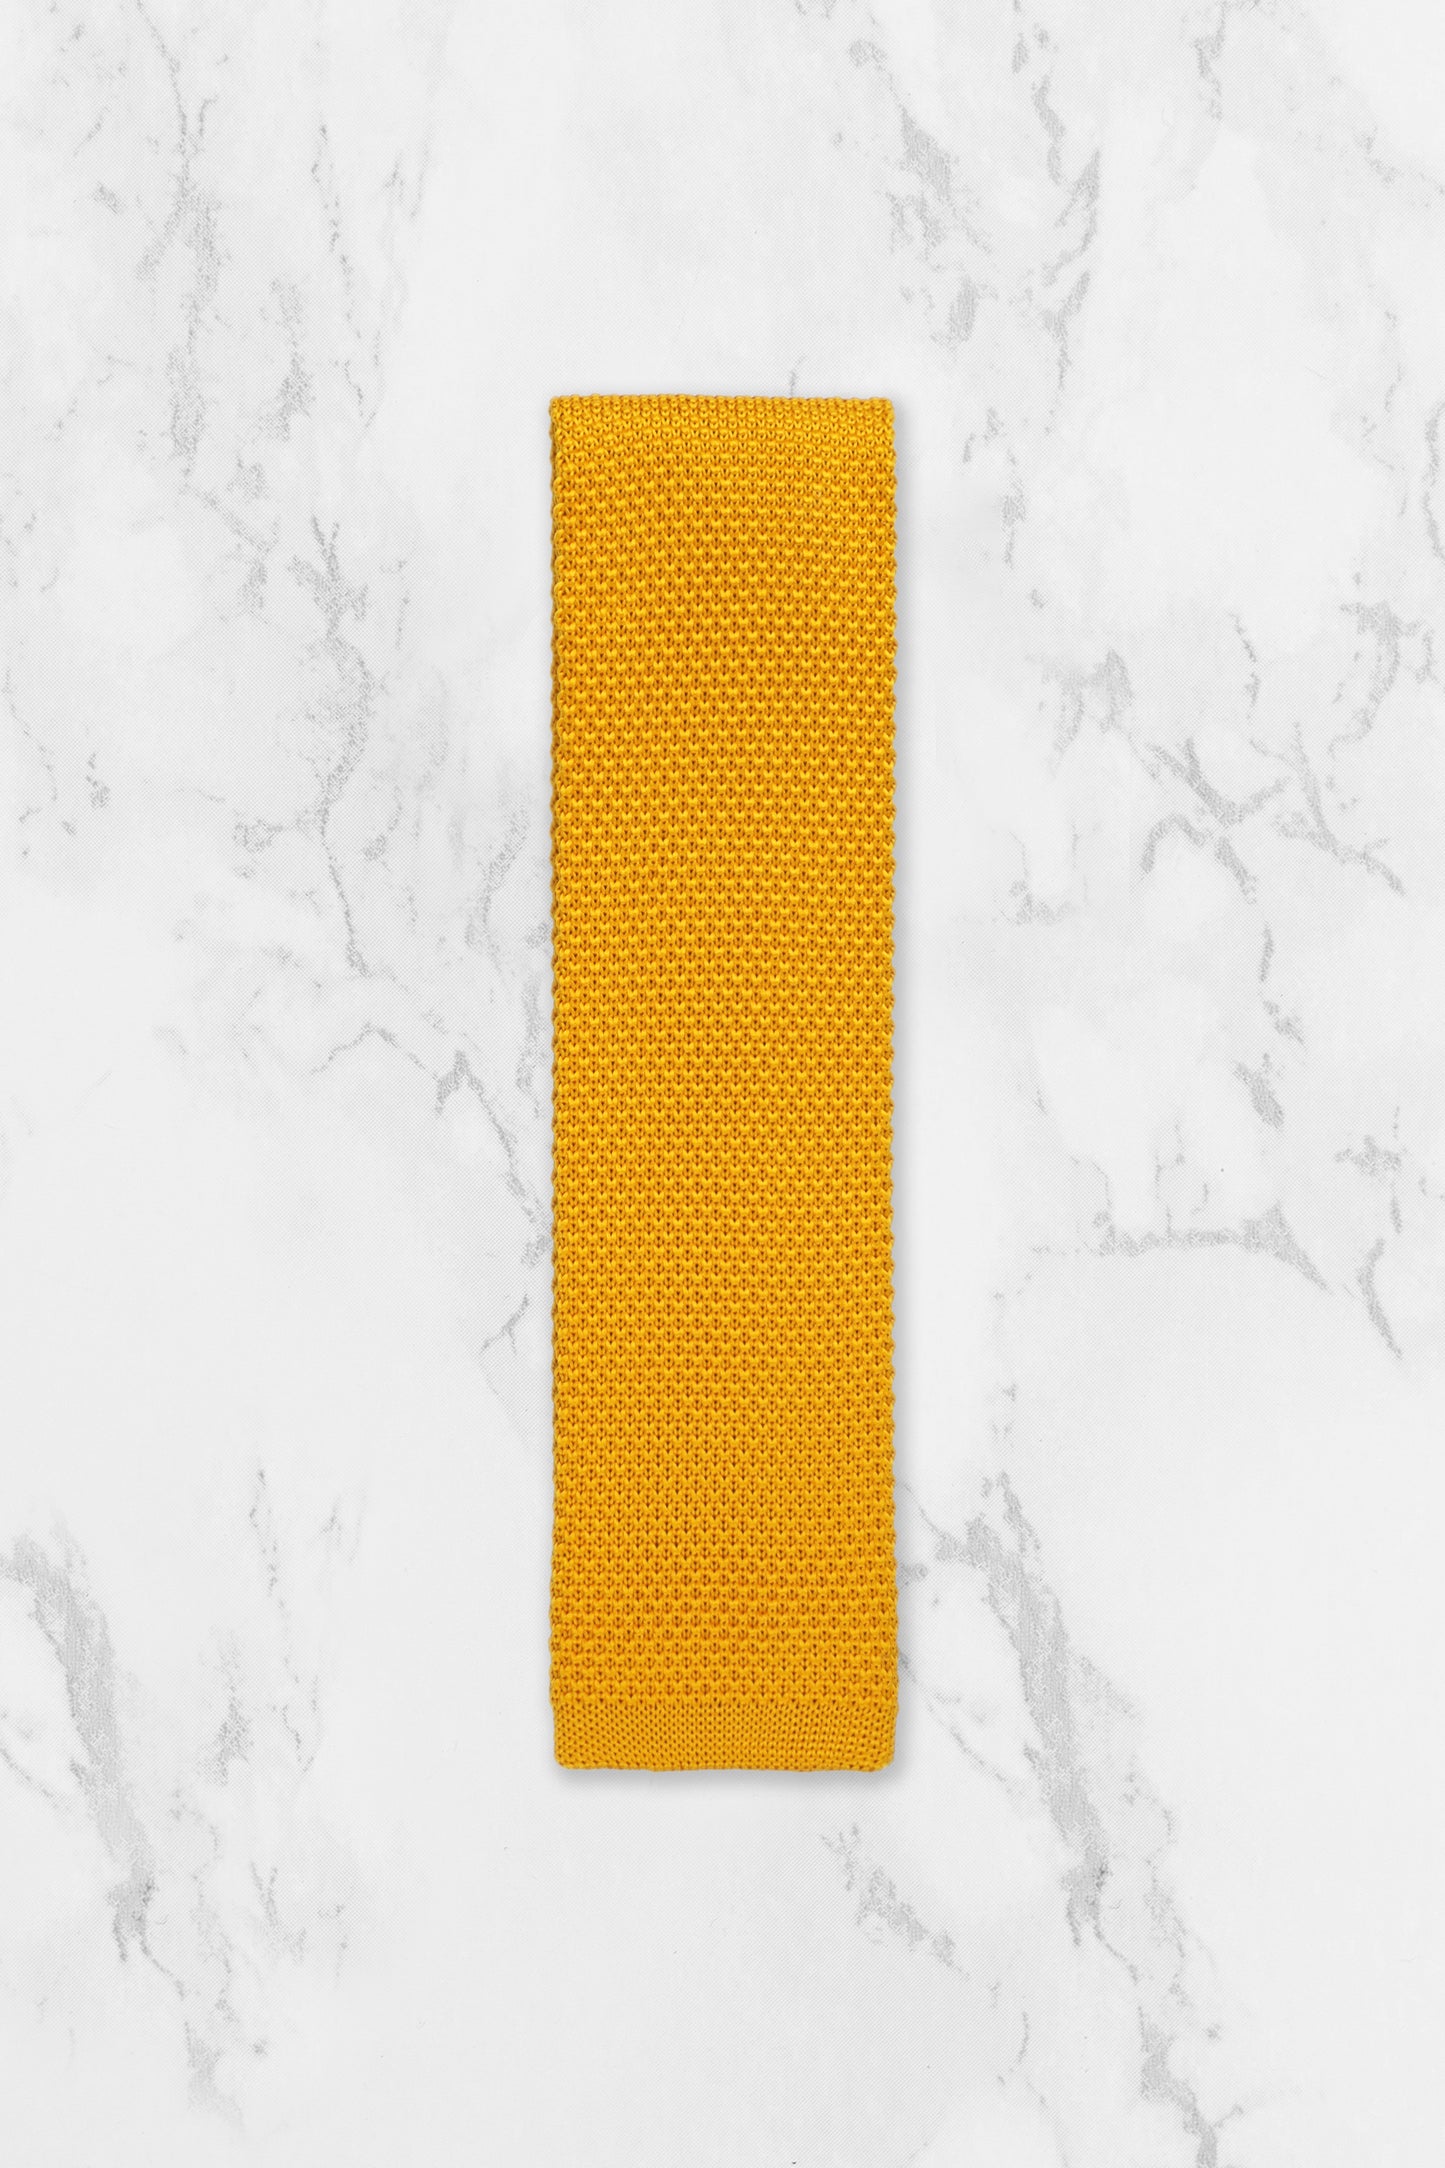 100% Polyester Diamond End Knitted Tie - Mustard Yellow